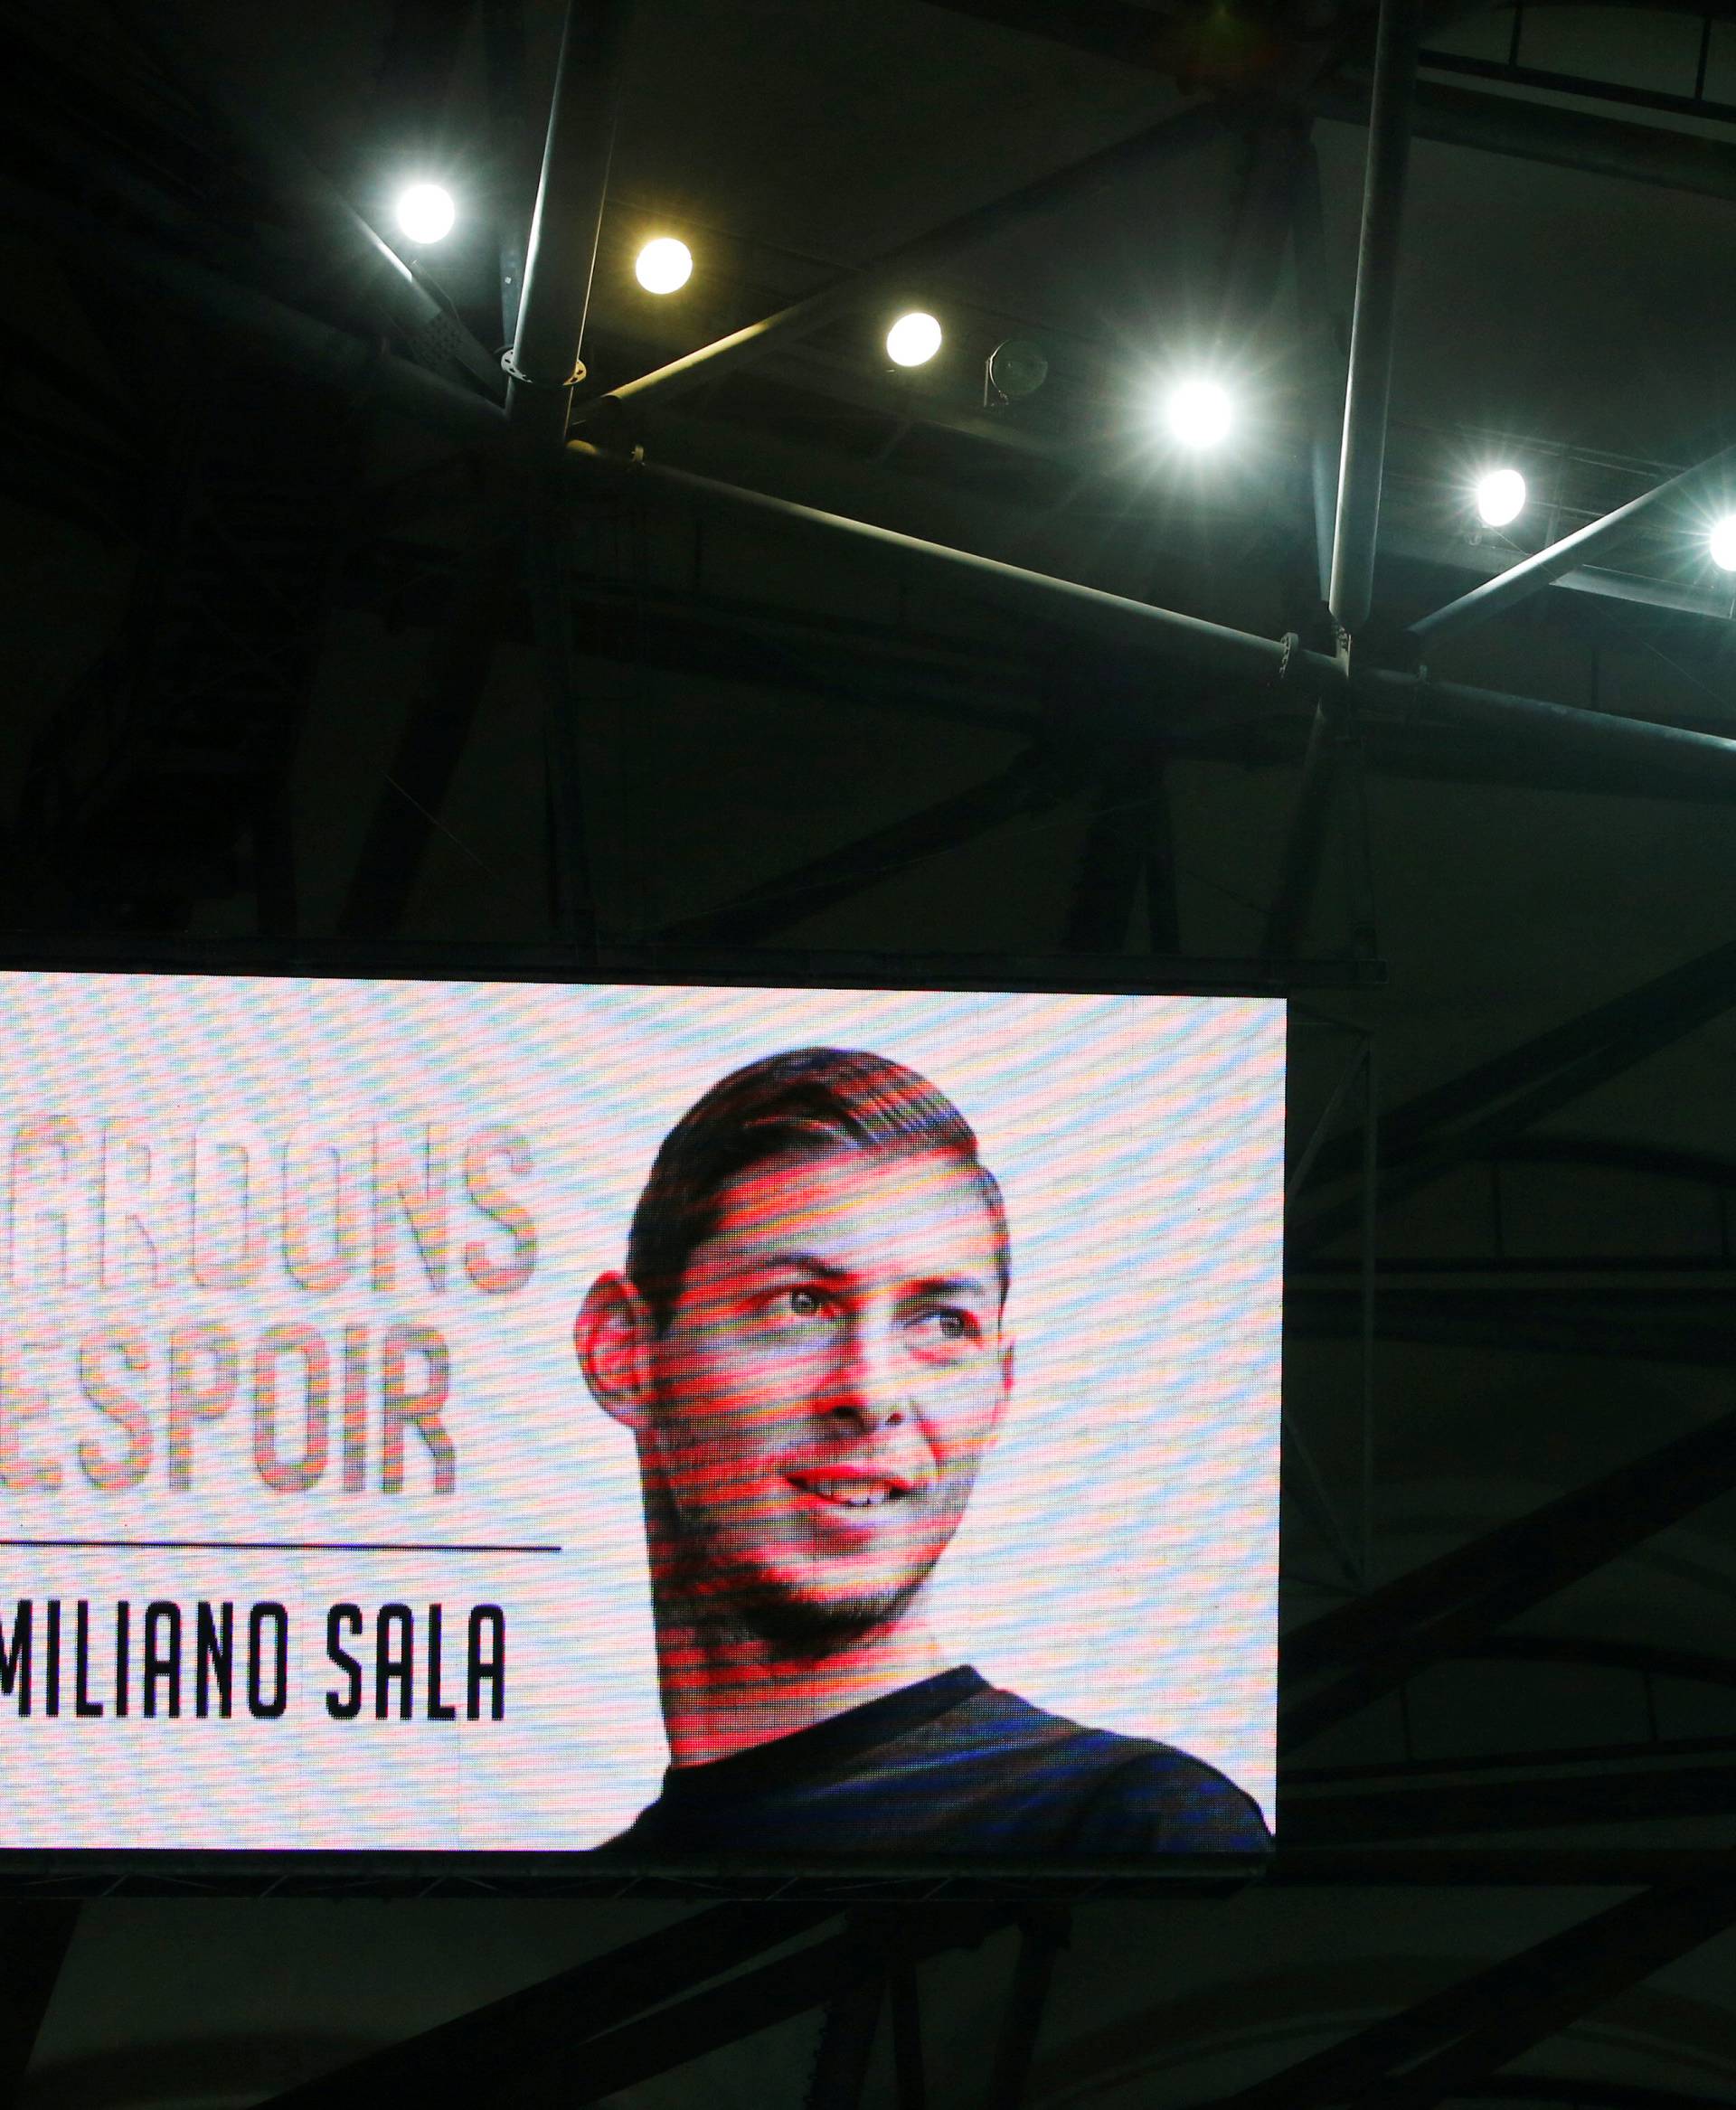 FILE PICTURE - General view of Emiliano Sala displayed on the big screen